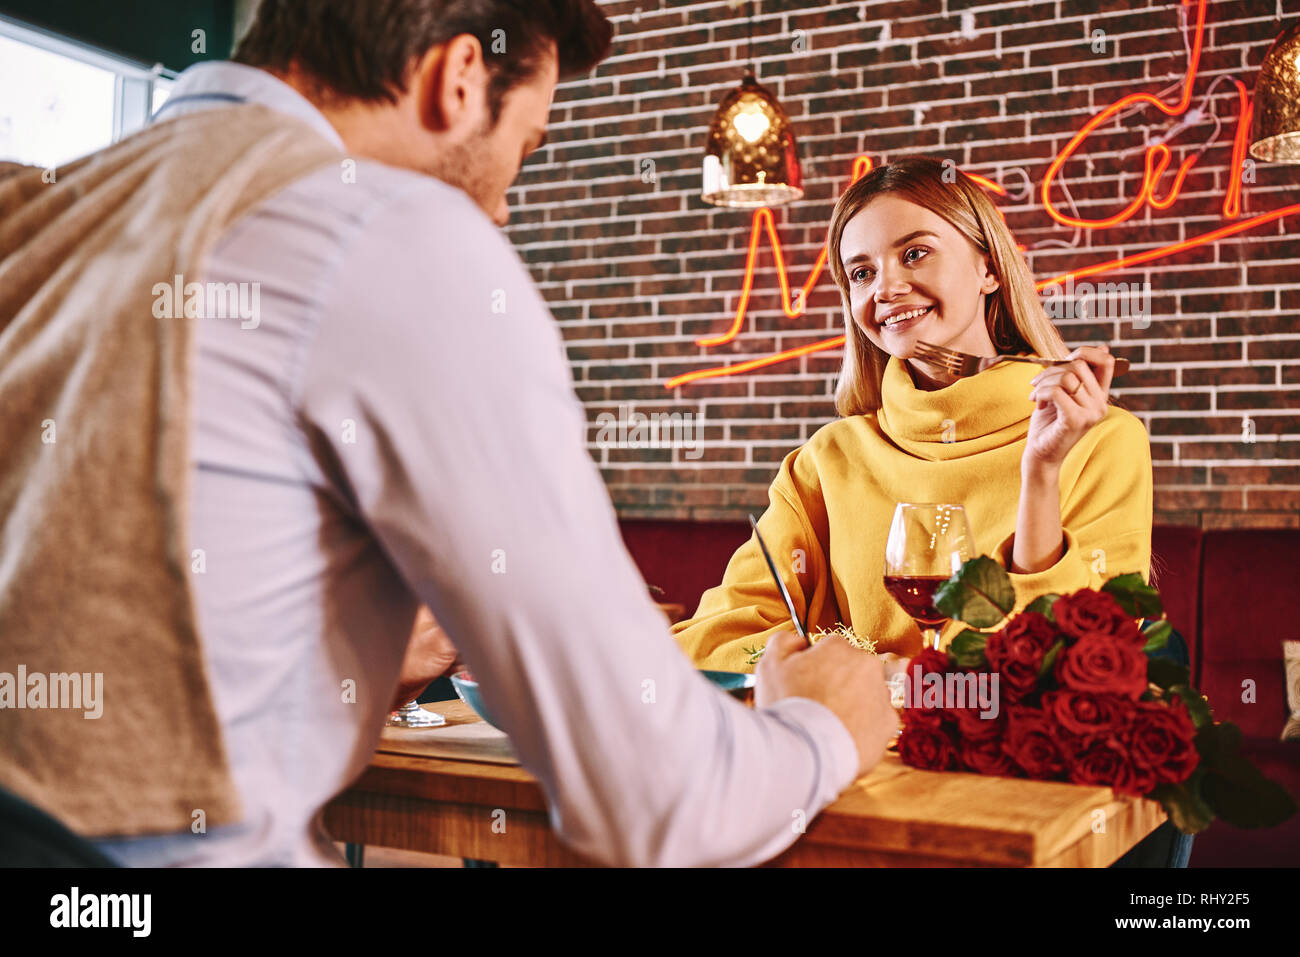 Romantic date. Blonde woman looks at her boyfriend while eating in restaurant. Red roses are lying on the table. Blonde young woman in mustard sweater Stock Photo